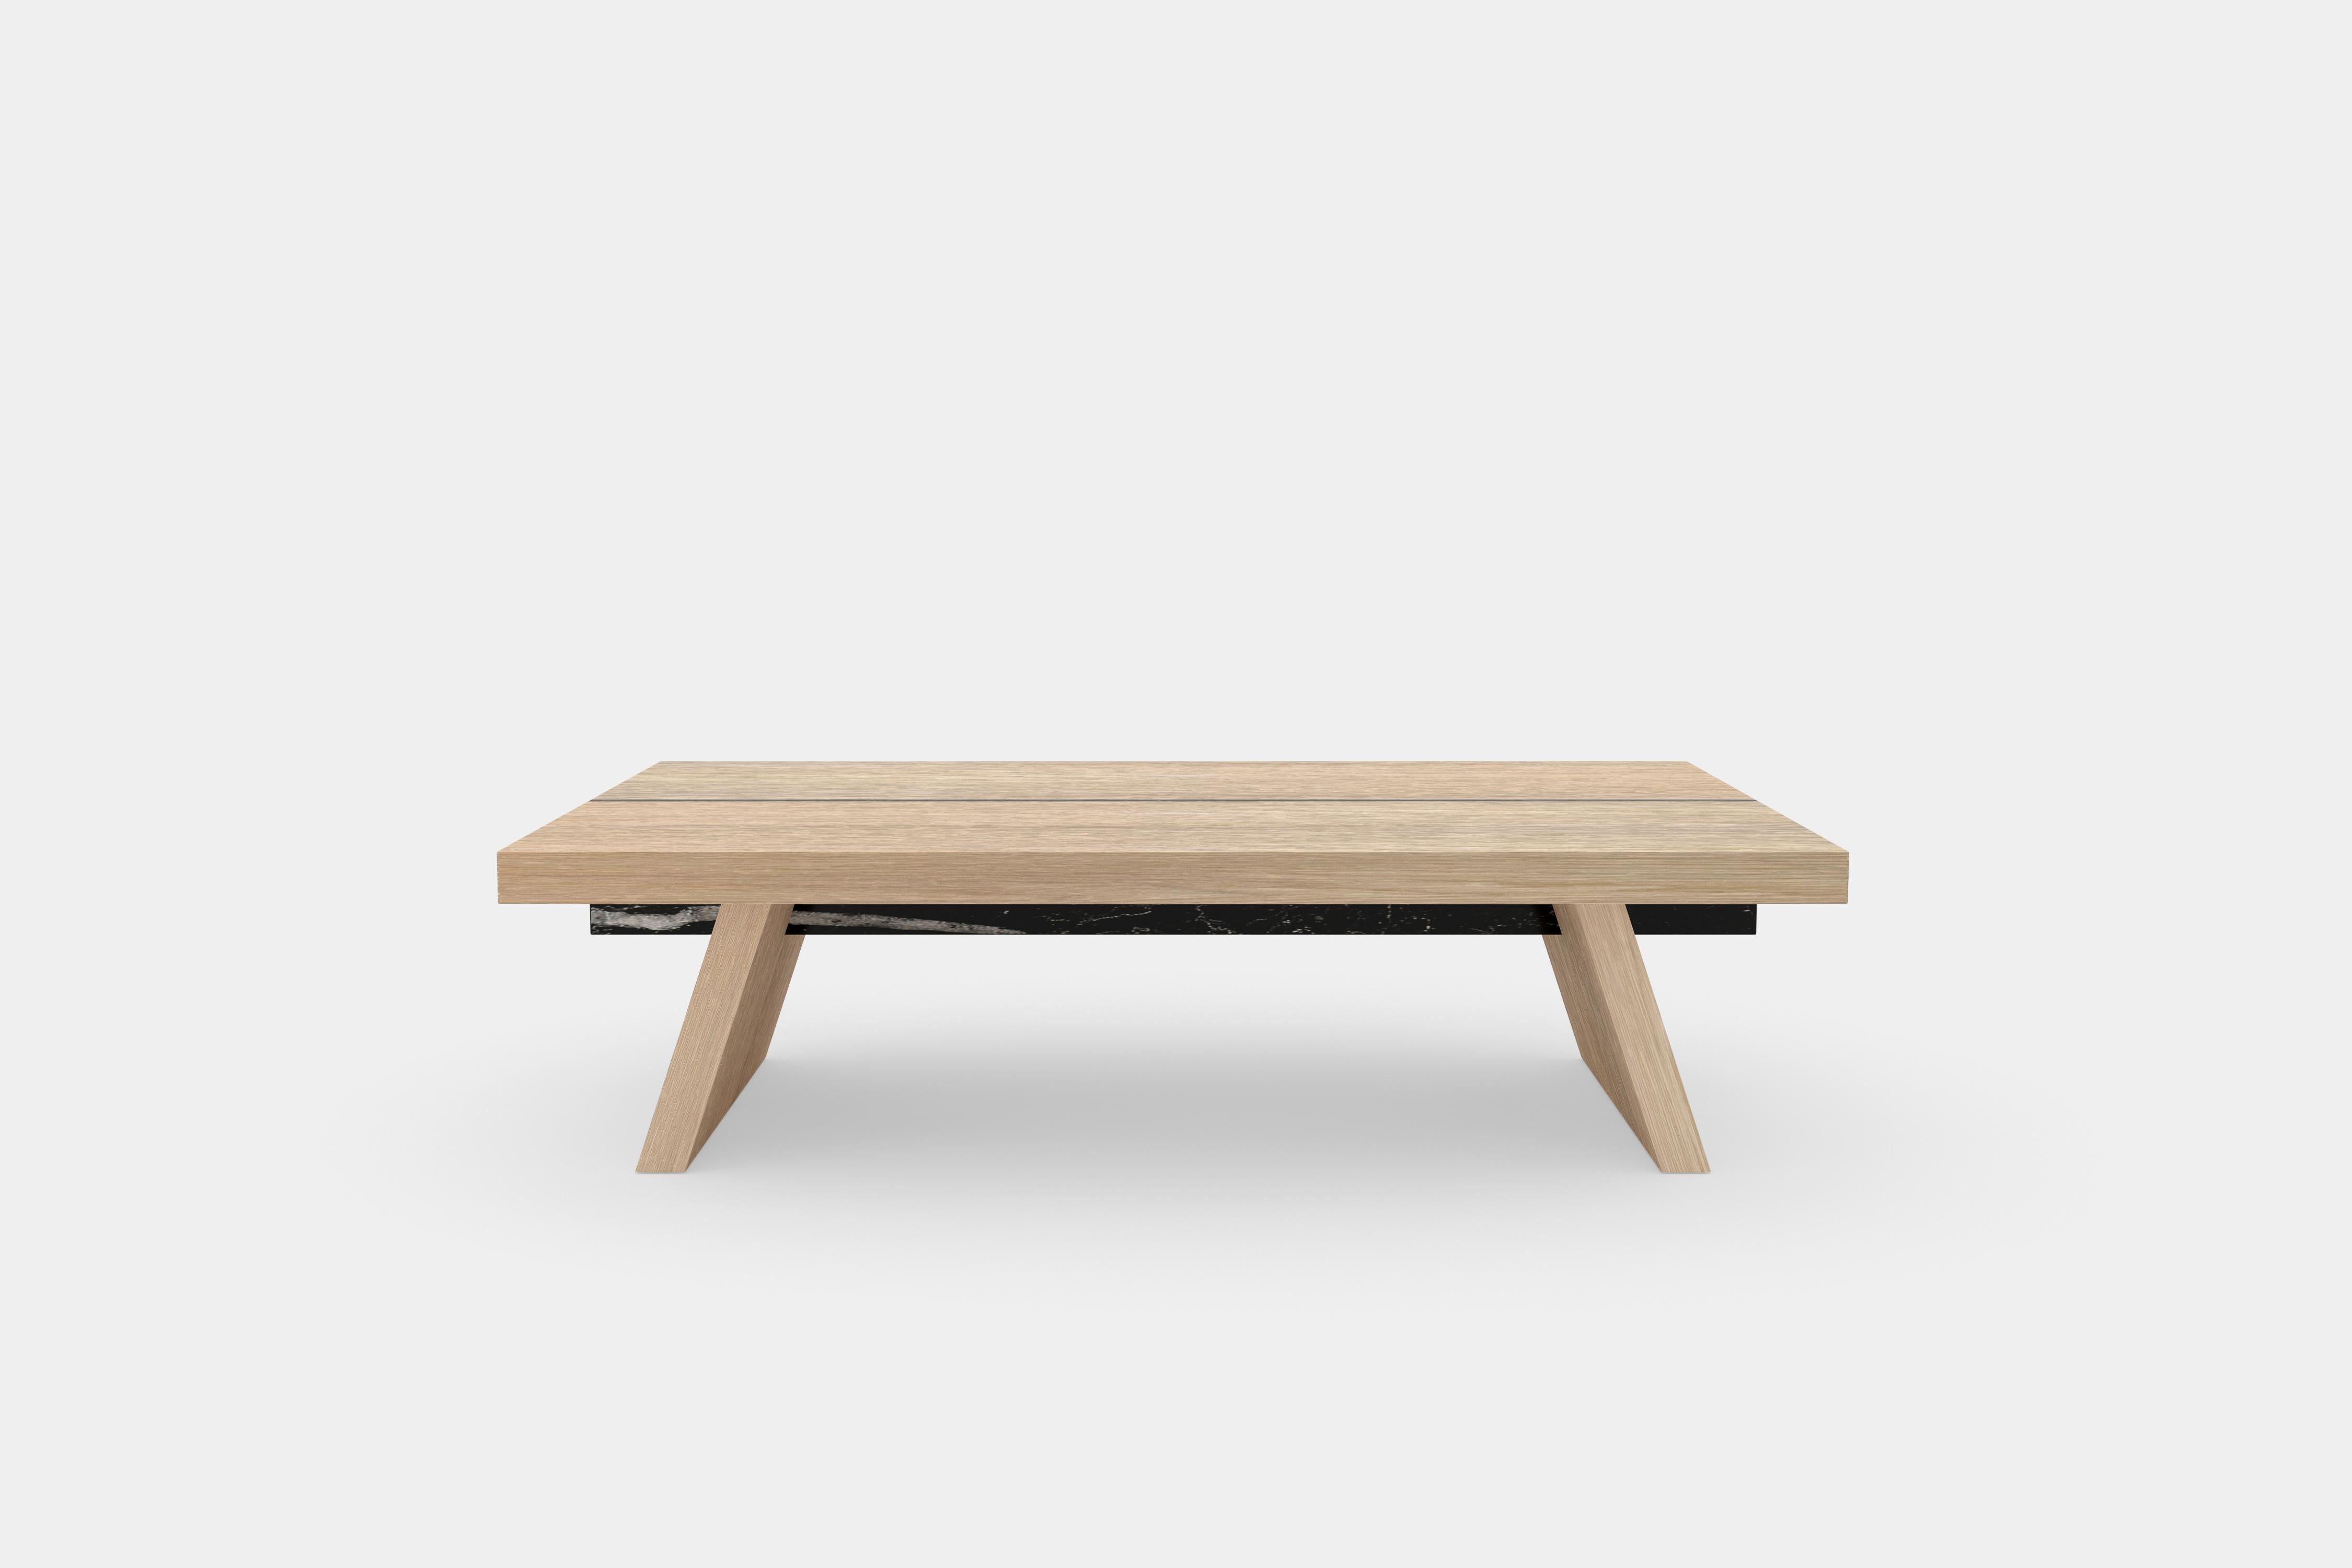 XXIe siècle et contemporain Laws of Motion Rectangular Coffee Table in Oak Solid Wood and Marble by NONO